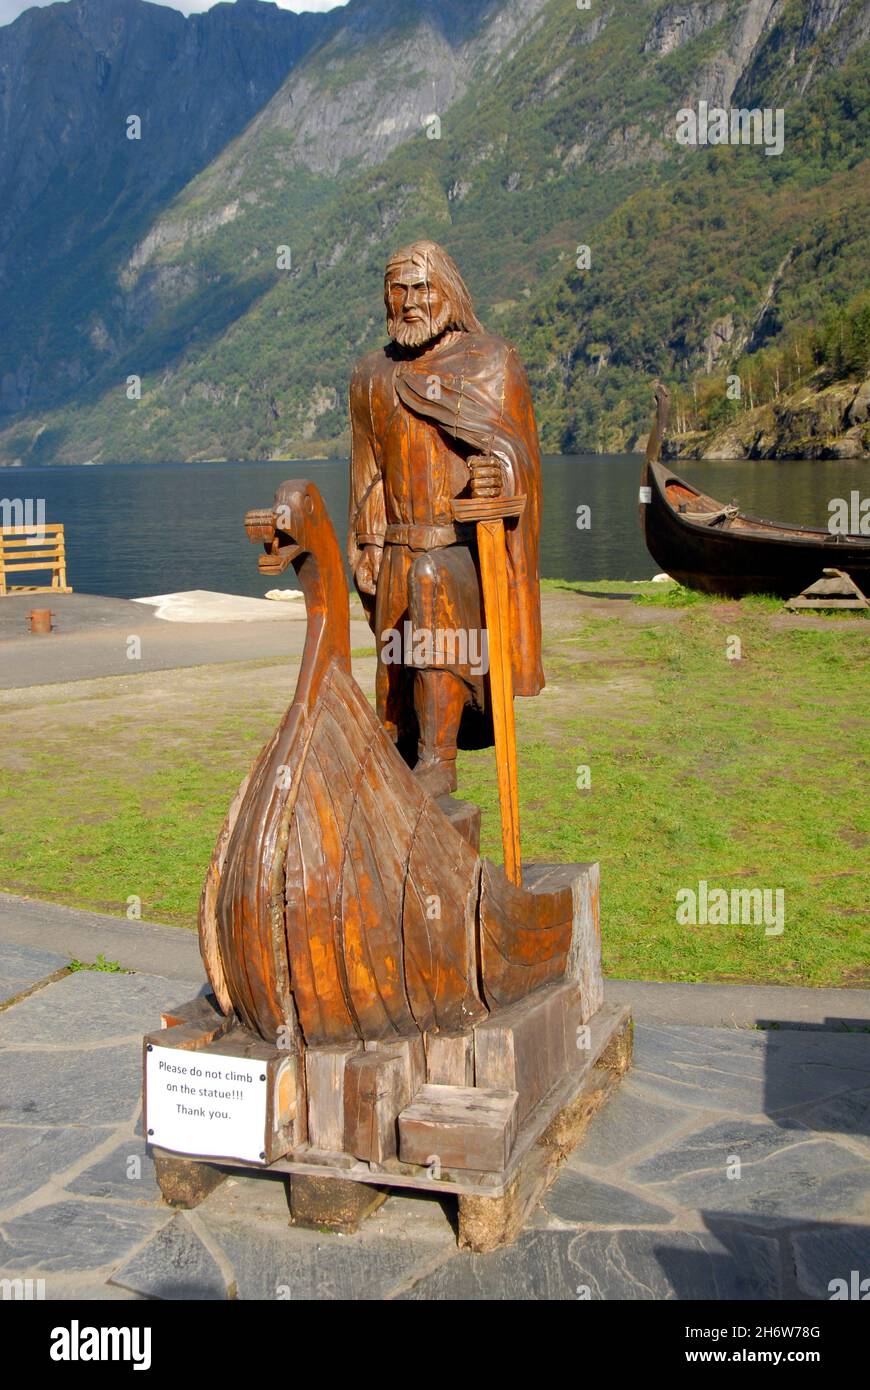 Wooden carving on public display, Gudvangen Fjordtell, Norway, with mountains beyond Stock Photo